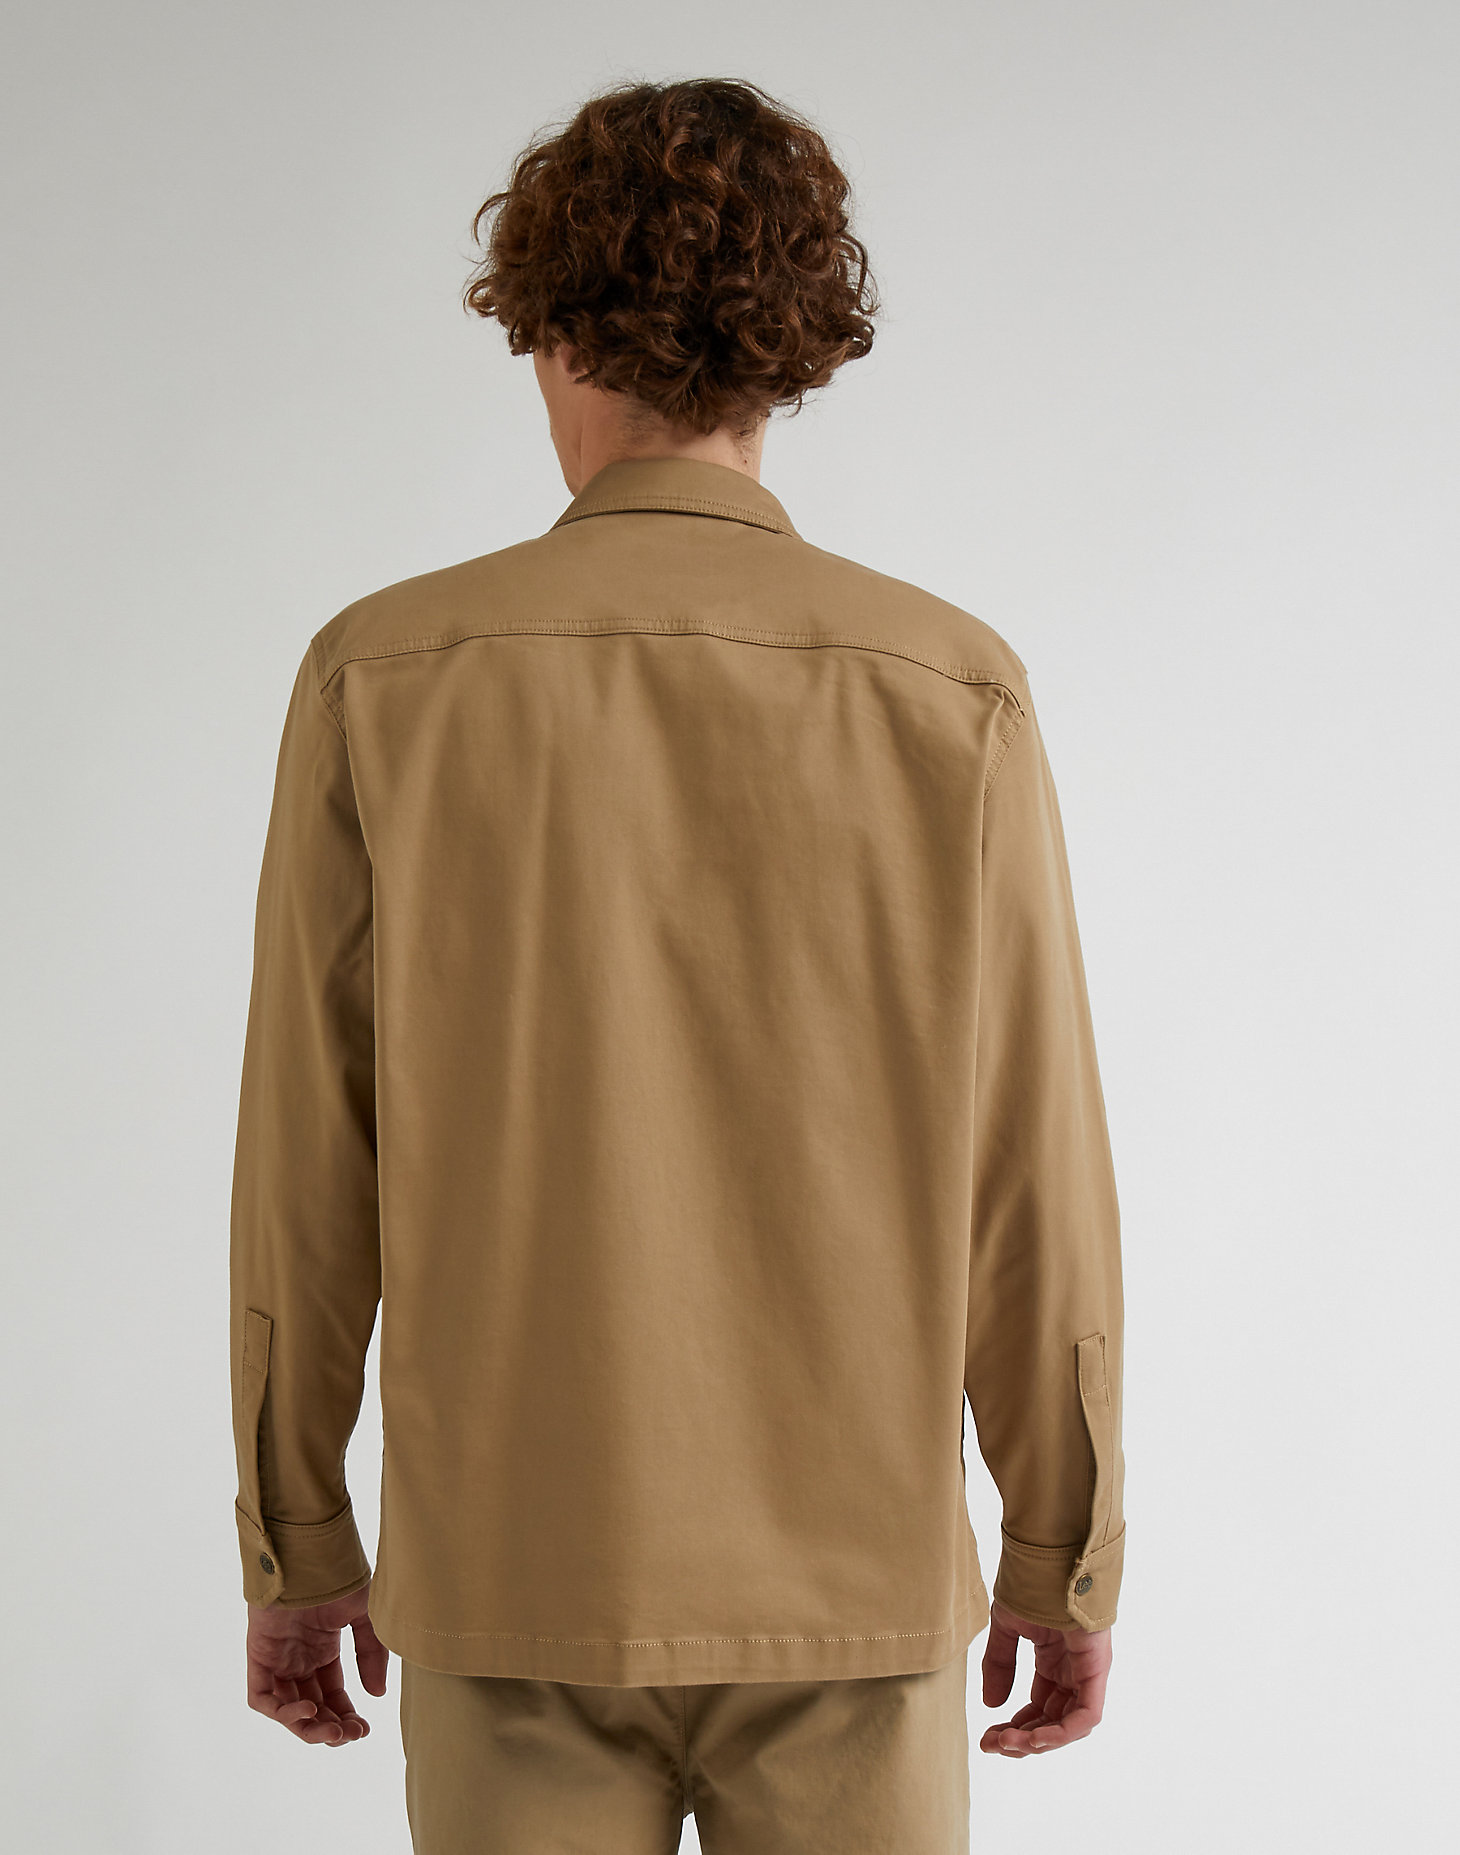 Relaxed Chetopa Overshirt in Clay alternative view 1